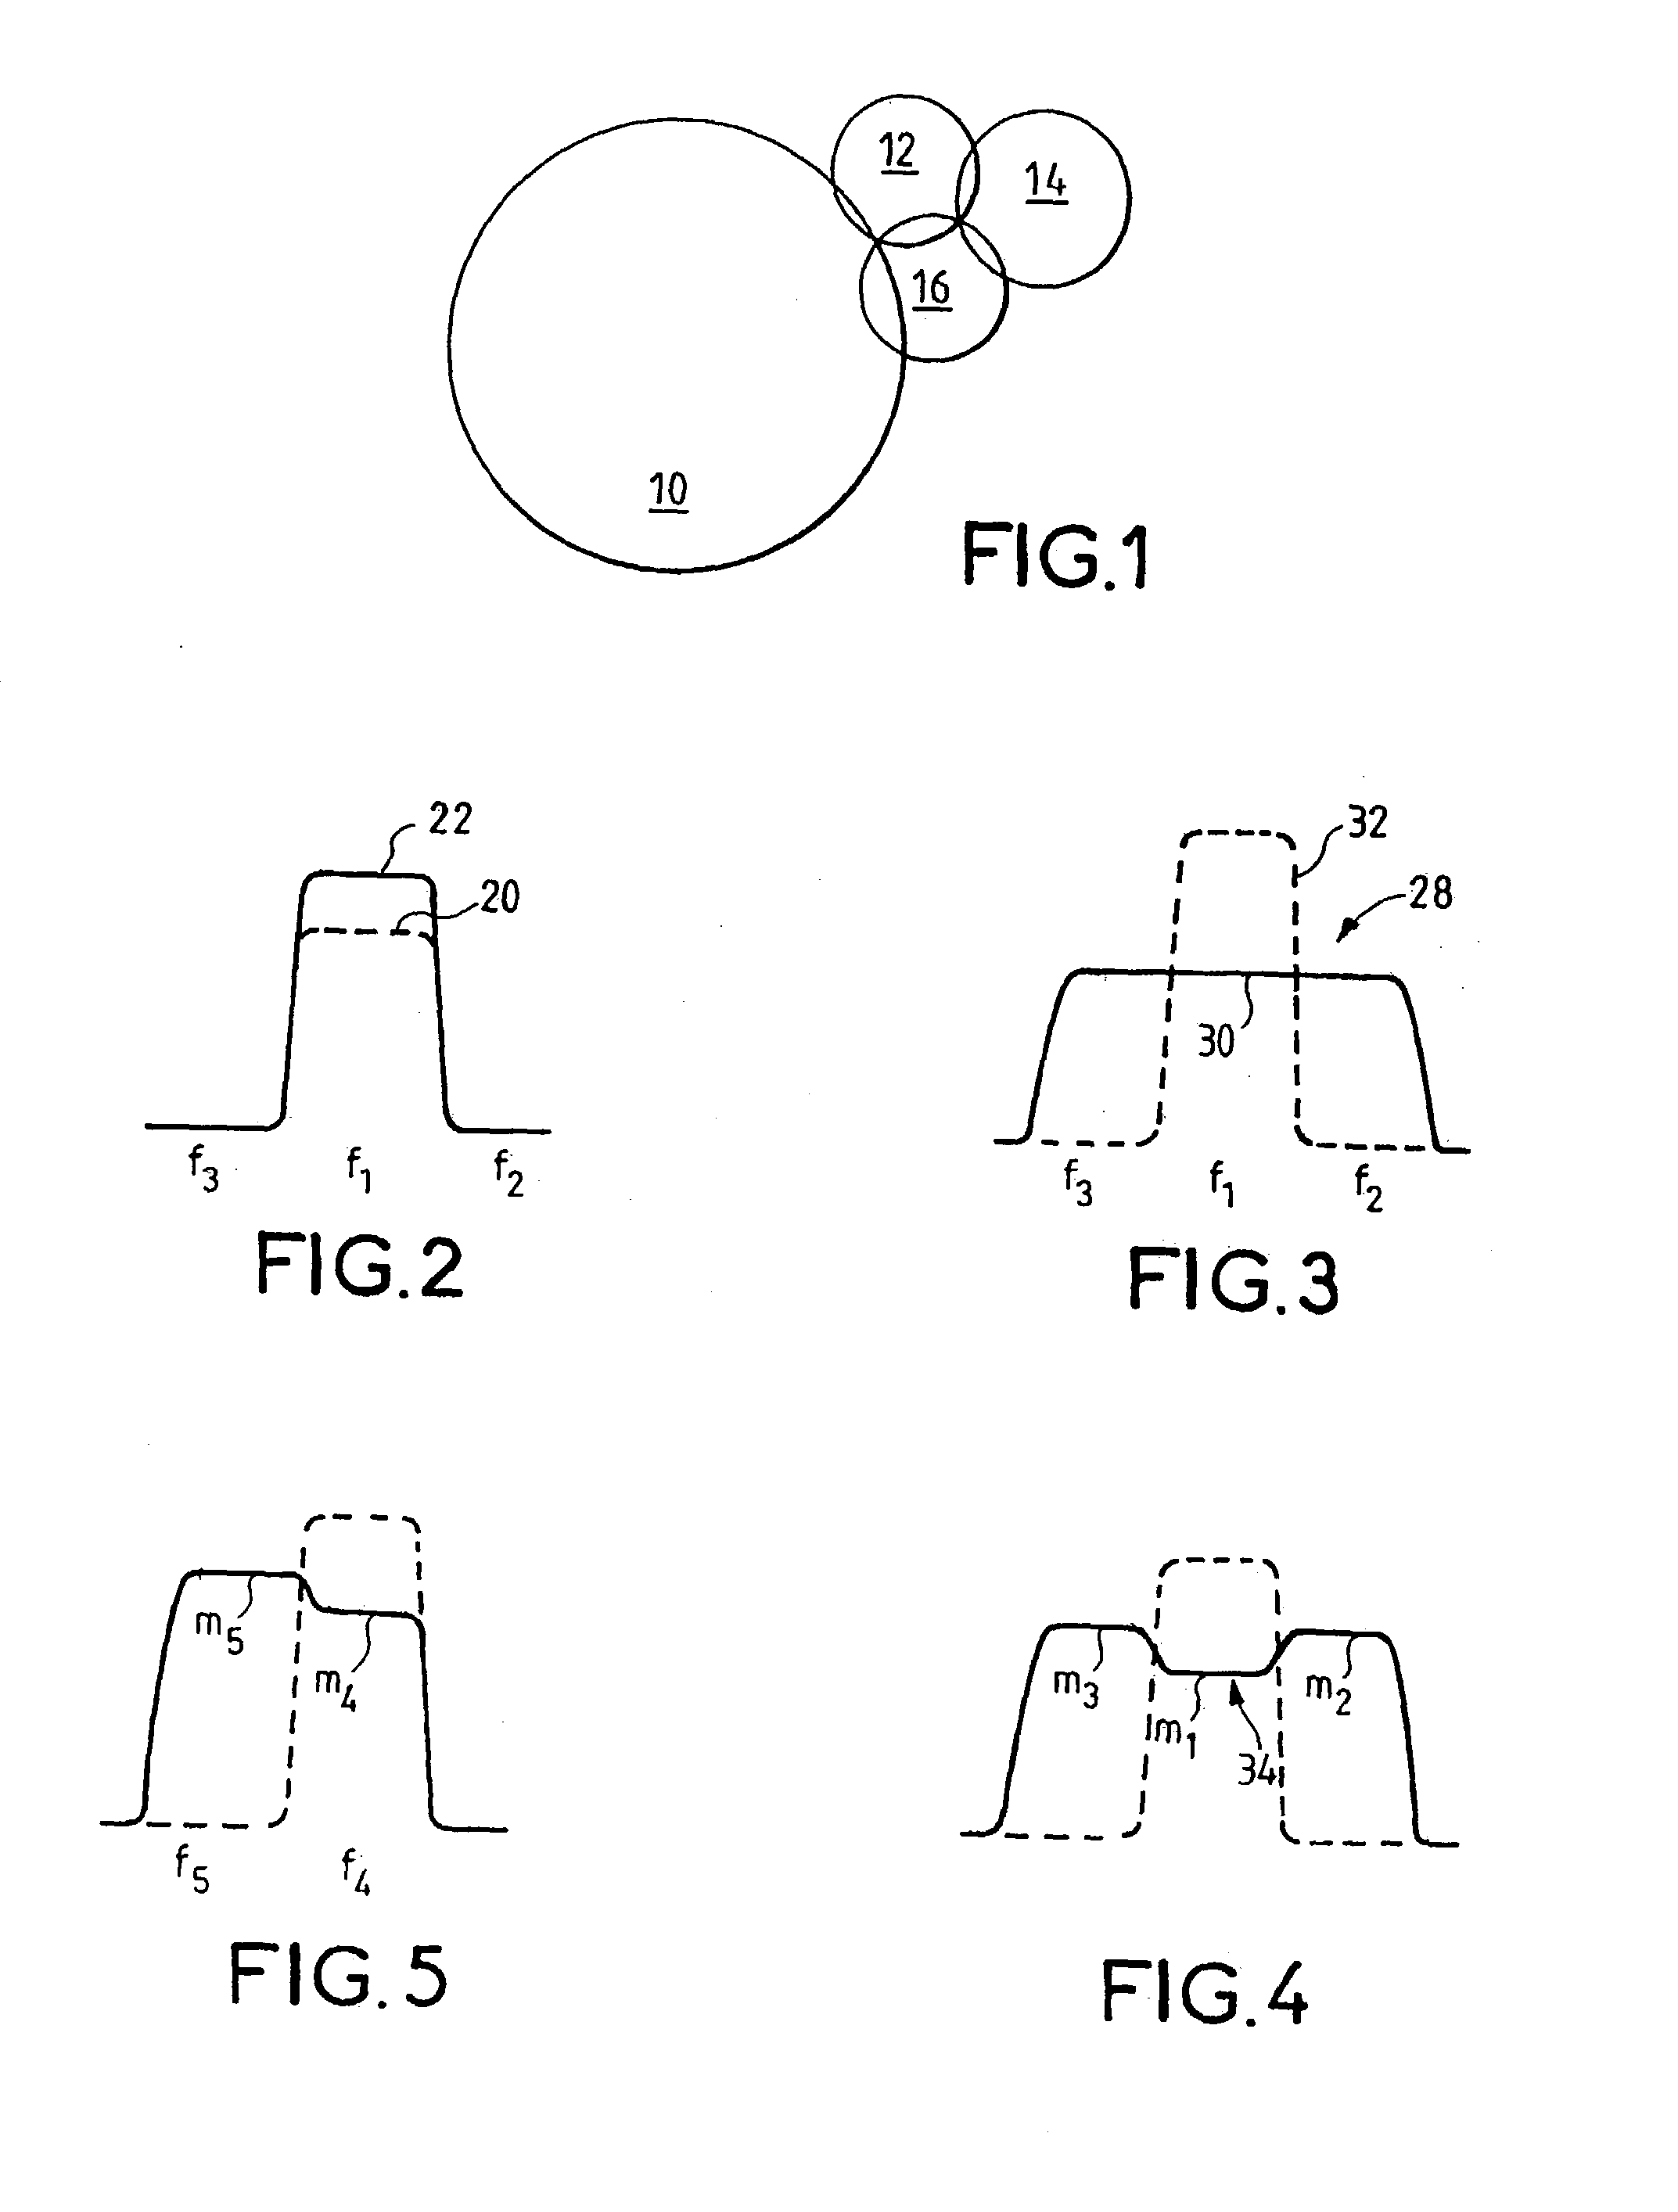 Method of transmitting calls in a cellular type telecommunications system using adjacent carrier frequency bands